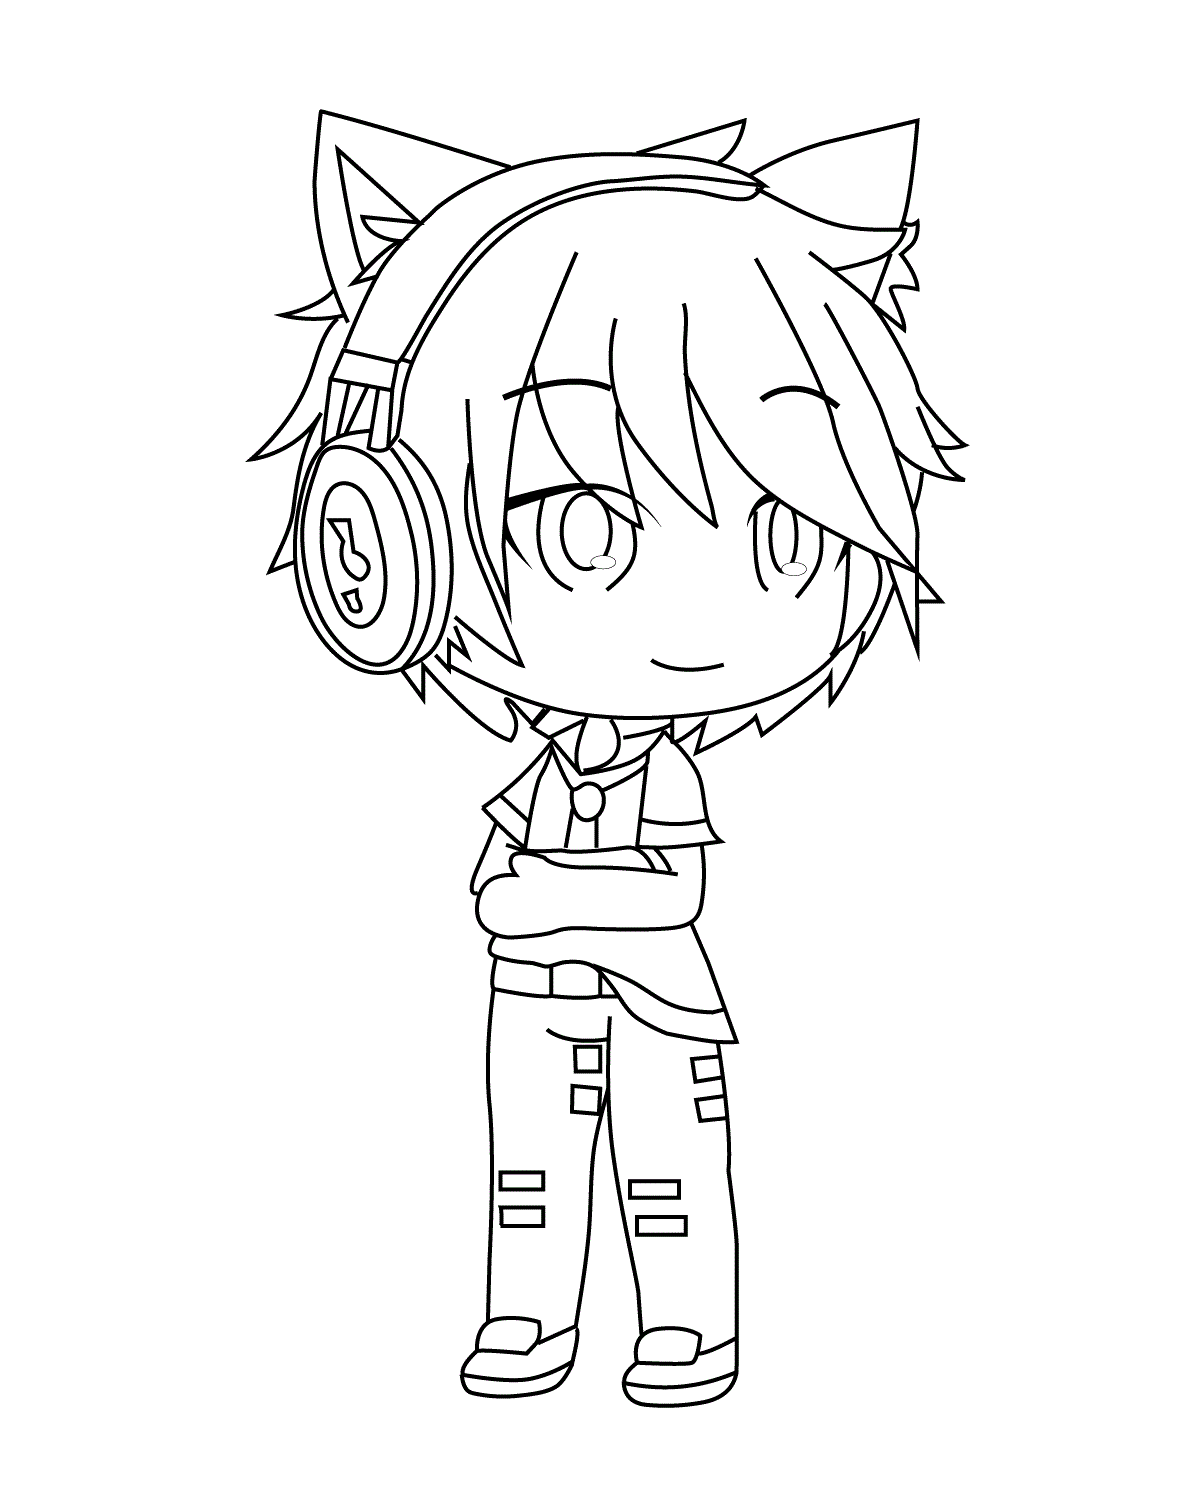 Cat boy is wearing headphone Coloring Pages - Gacha Life Coloring Pages